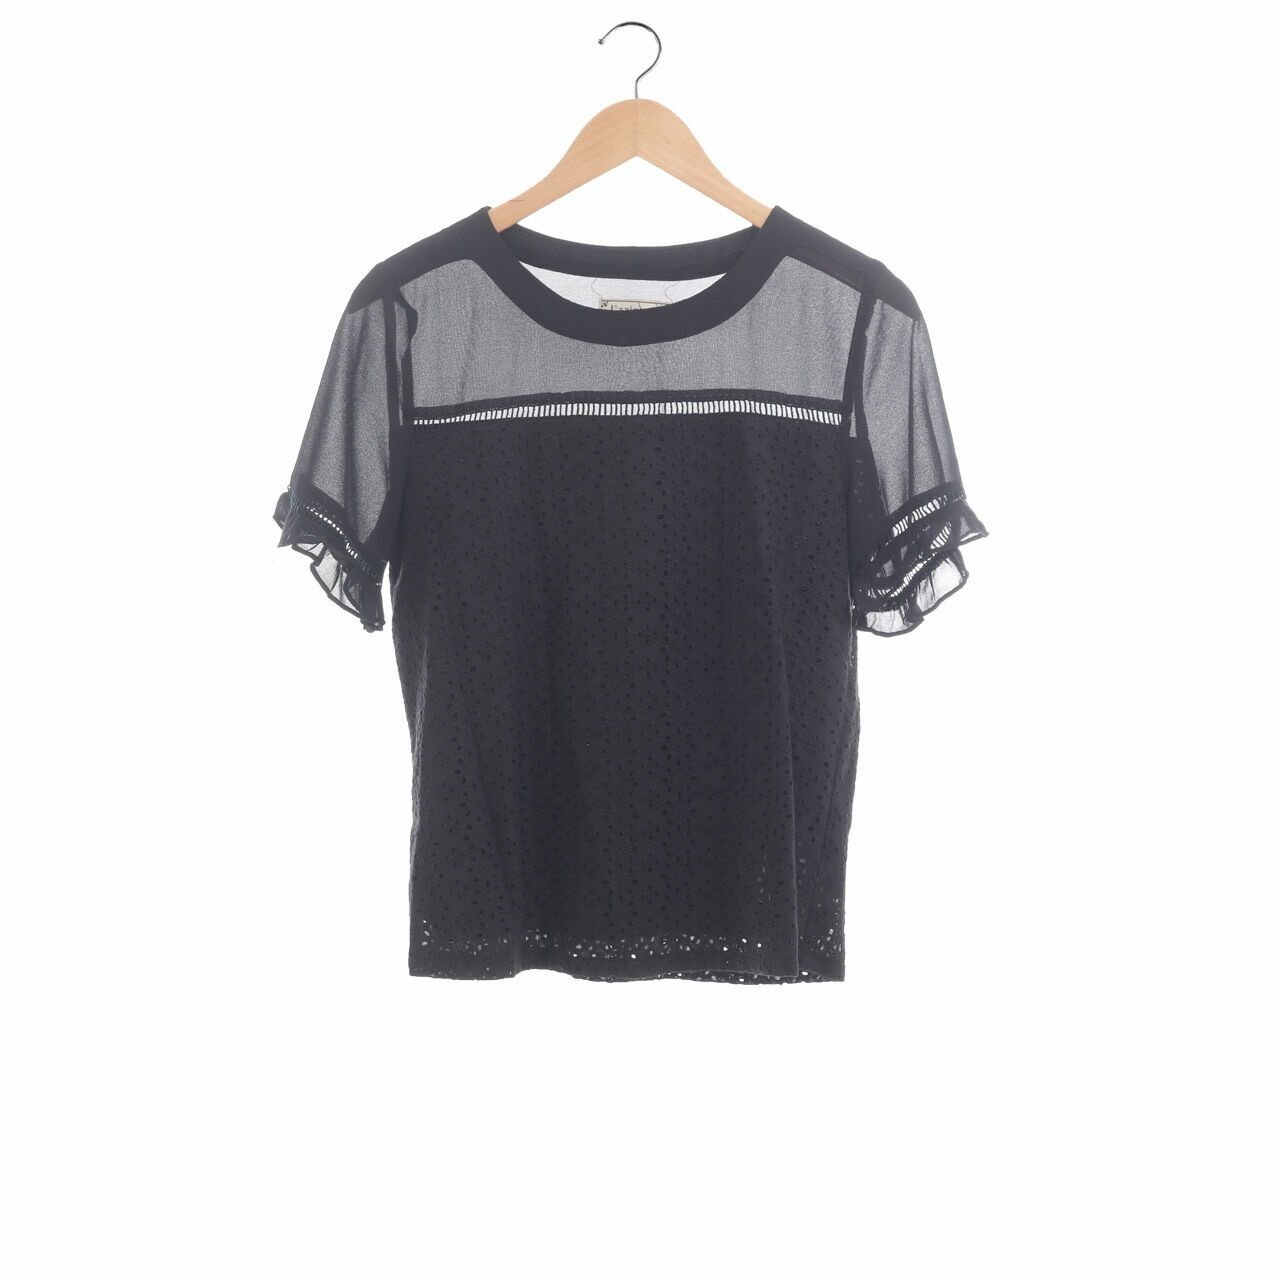 L'zzie Black Perforated Blouse